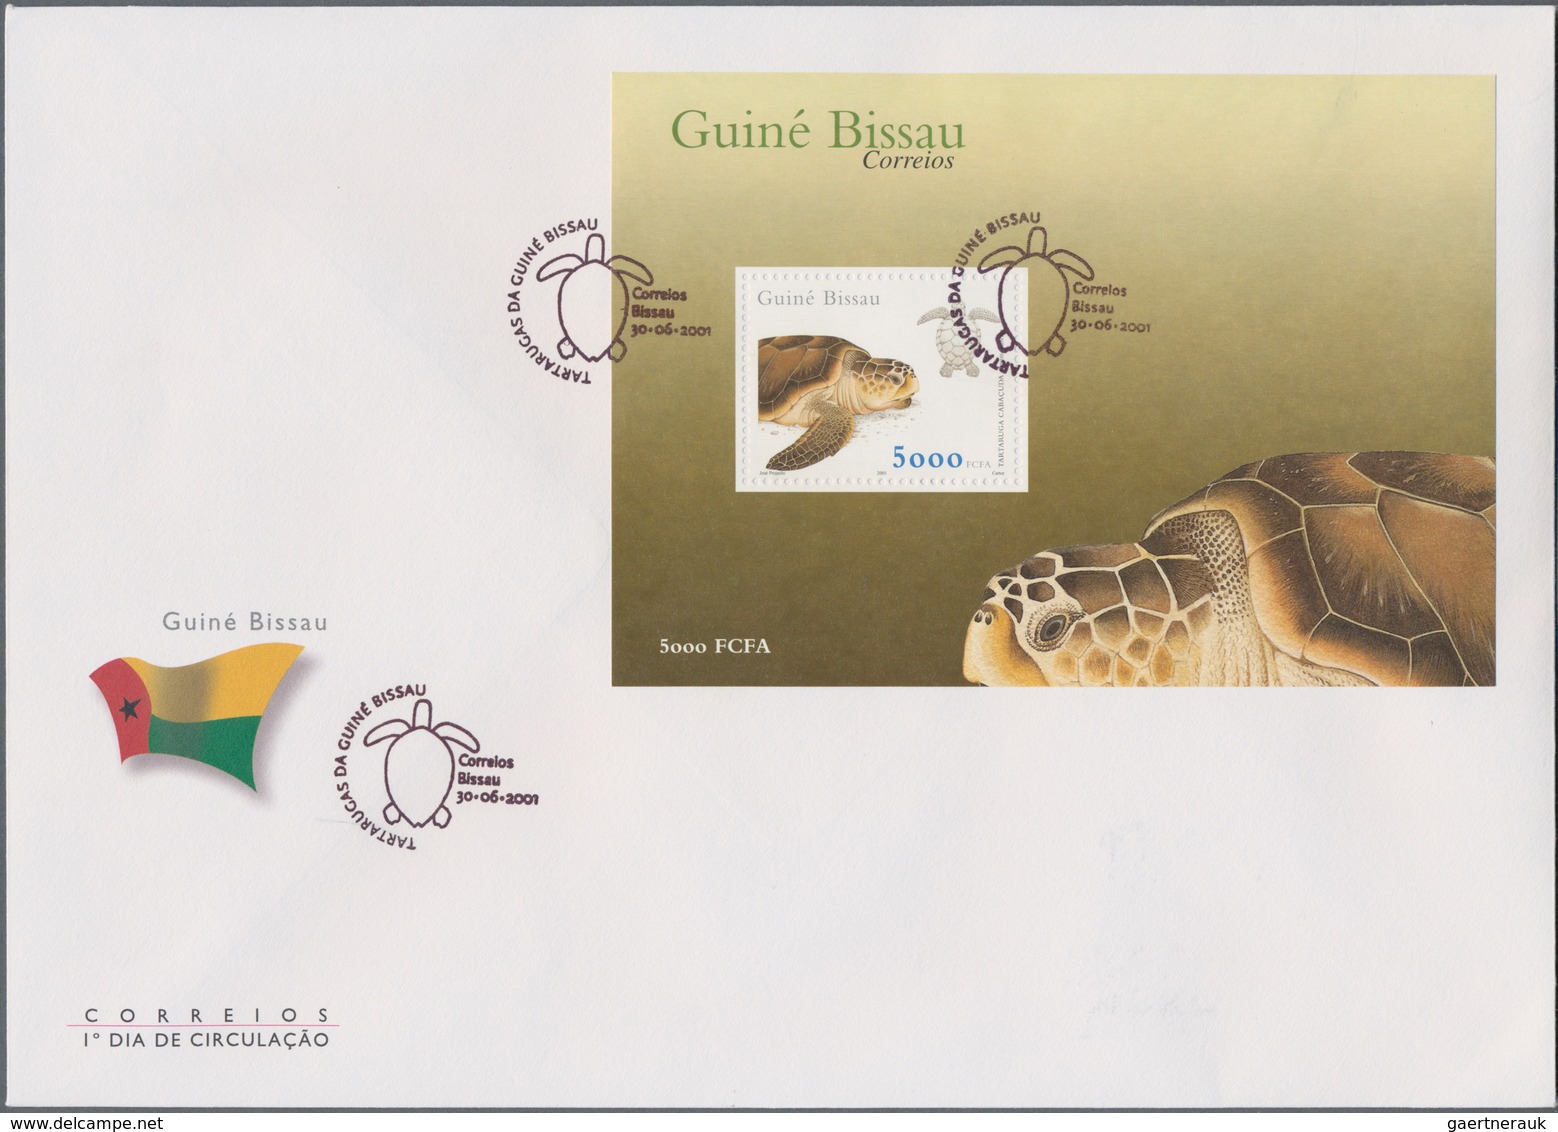 Guinea-Bissau: 2001/2002, stock of complete sets and souvenir sheets cancelled to order or on F.D.C.